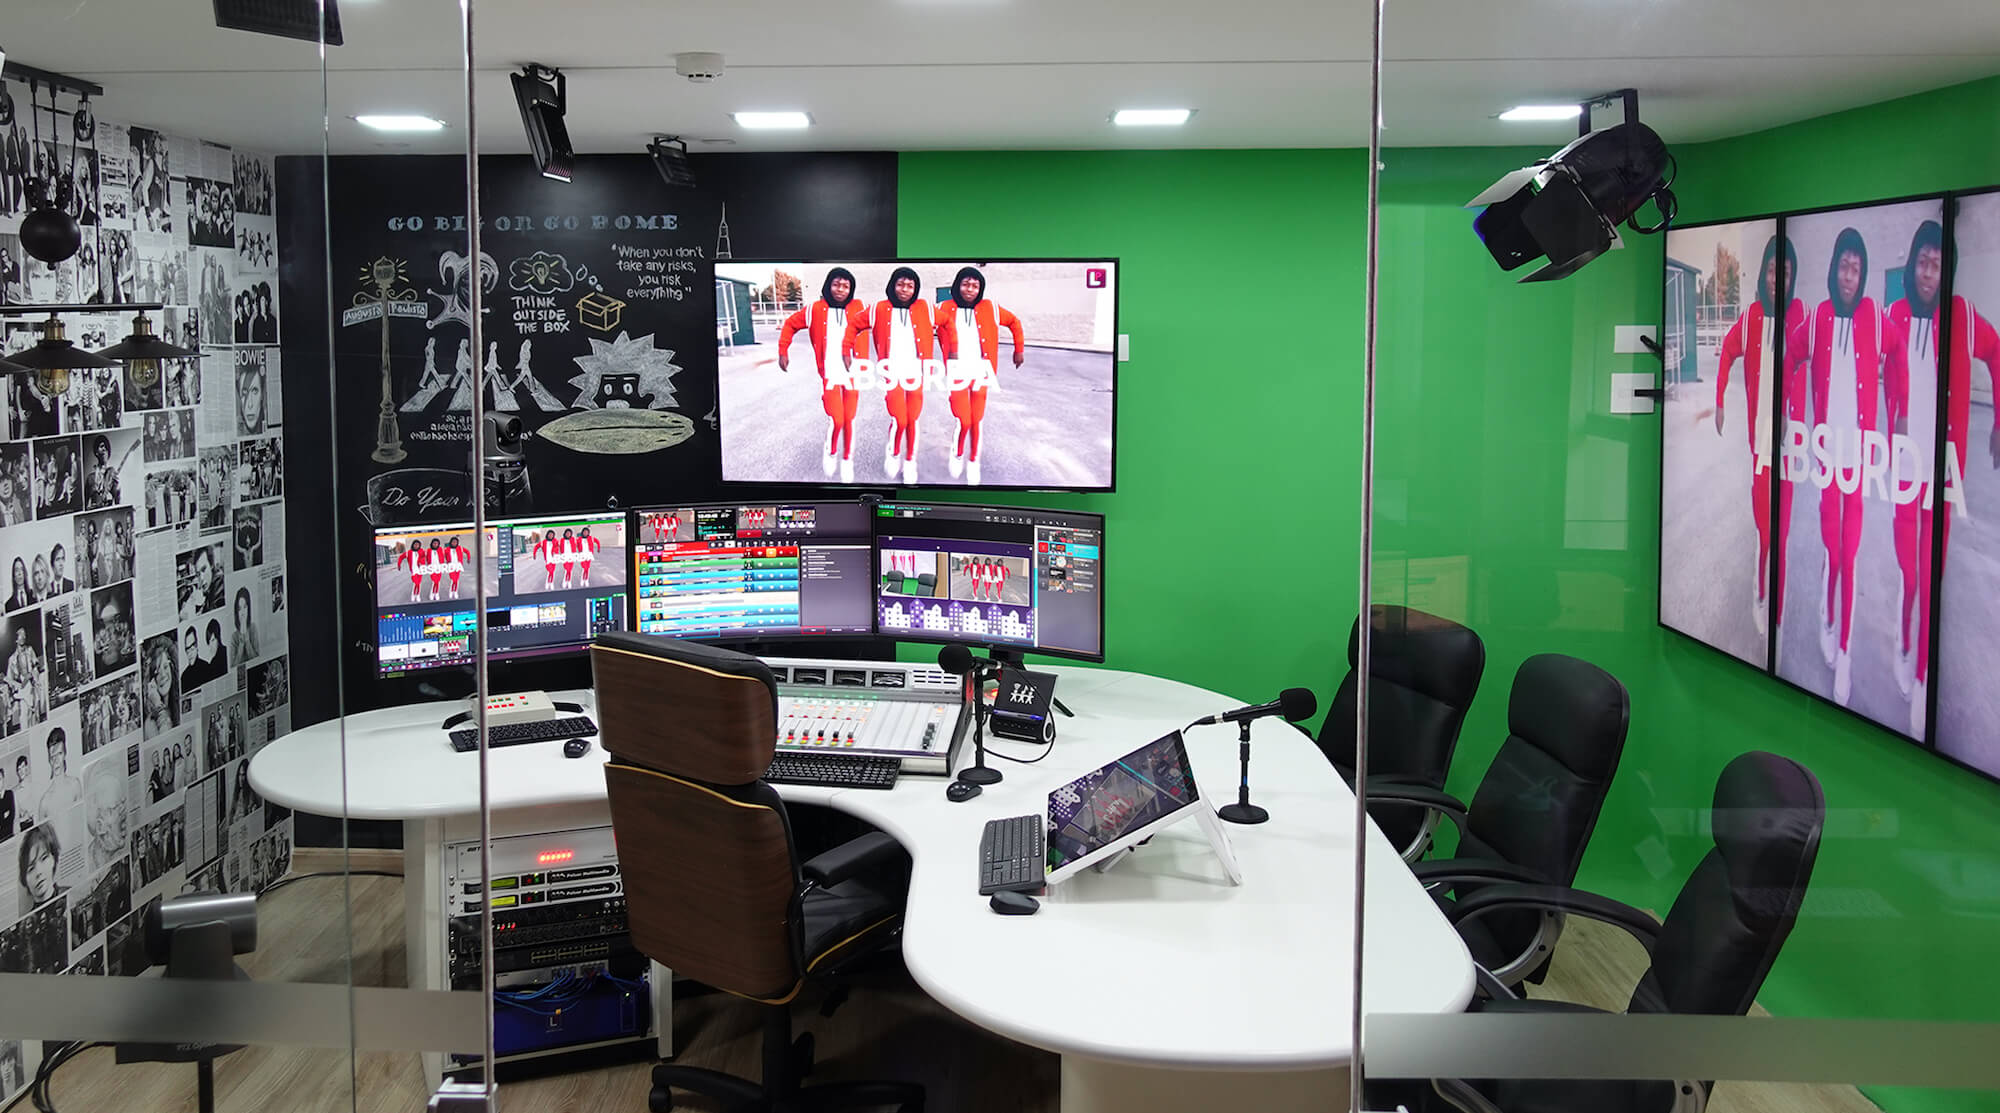 Video studio with monitors and microphones on the table